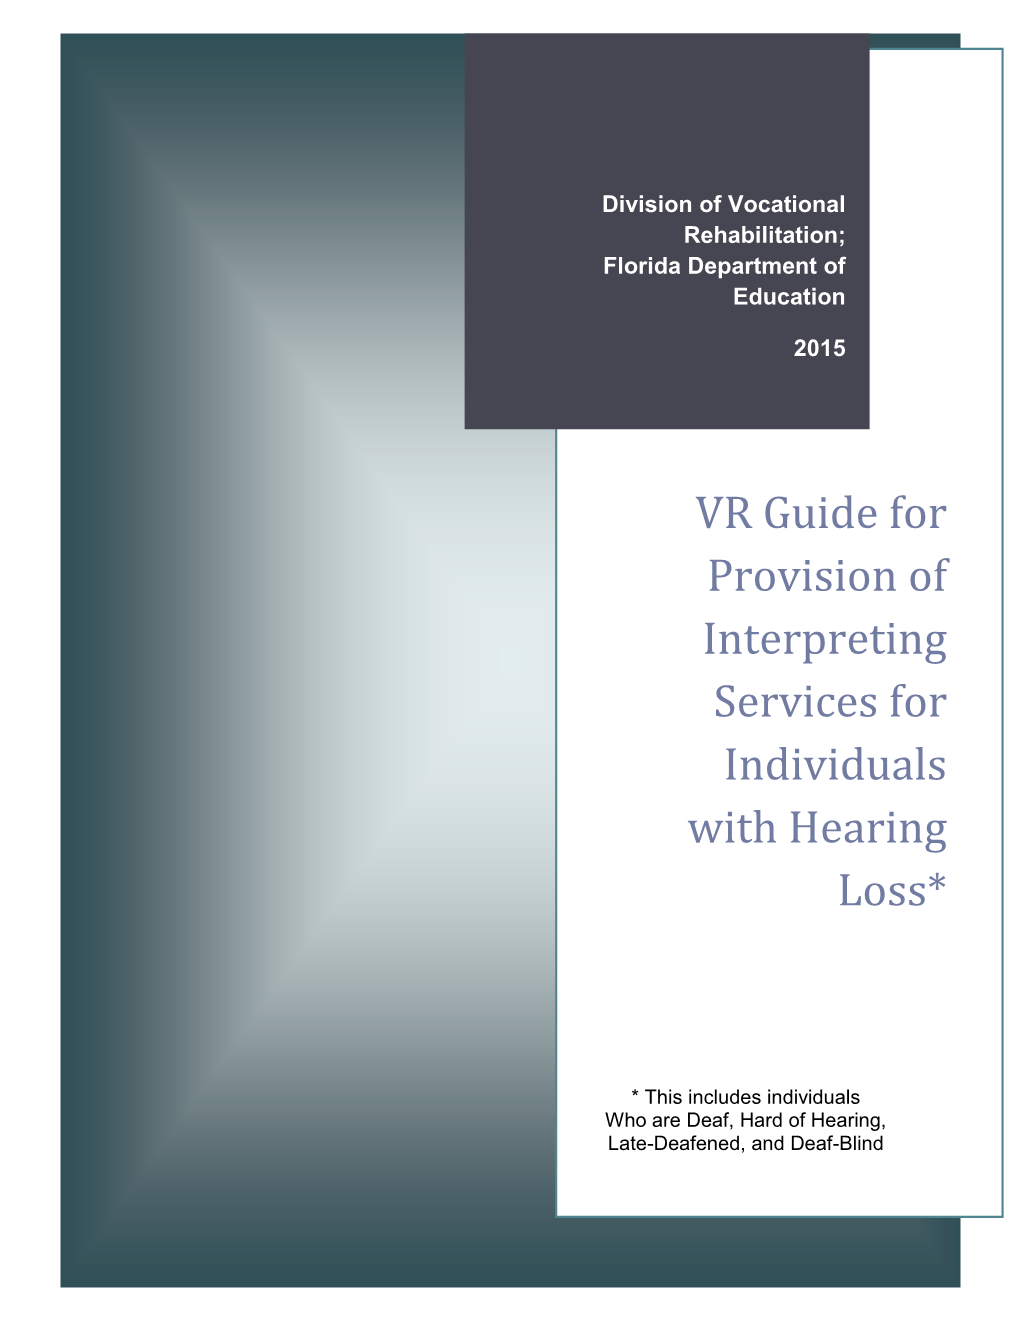 VR GUIDE for PROVISION of INTERPRETING SERVICES for INDIVIDUALS with HEARING LOSS* May 27, 2015